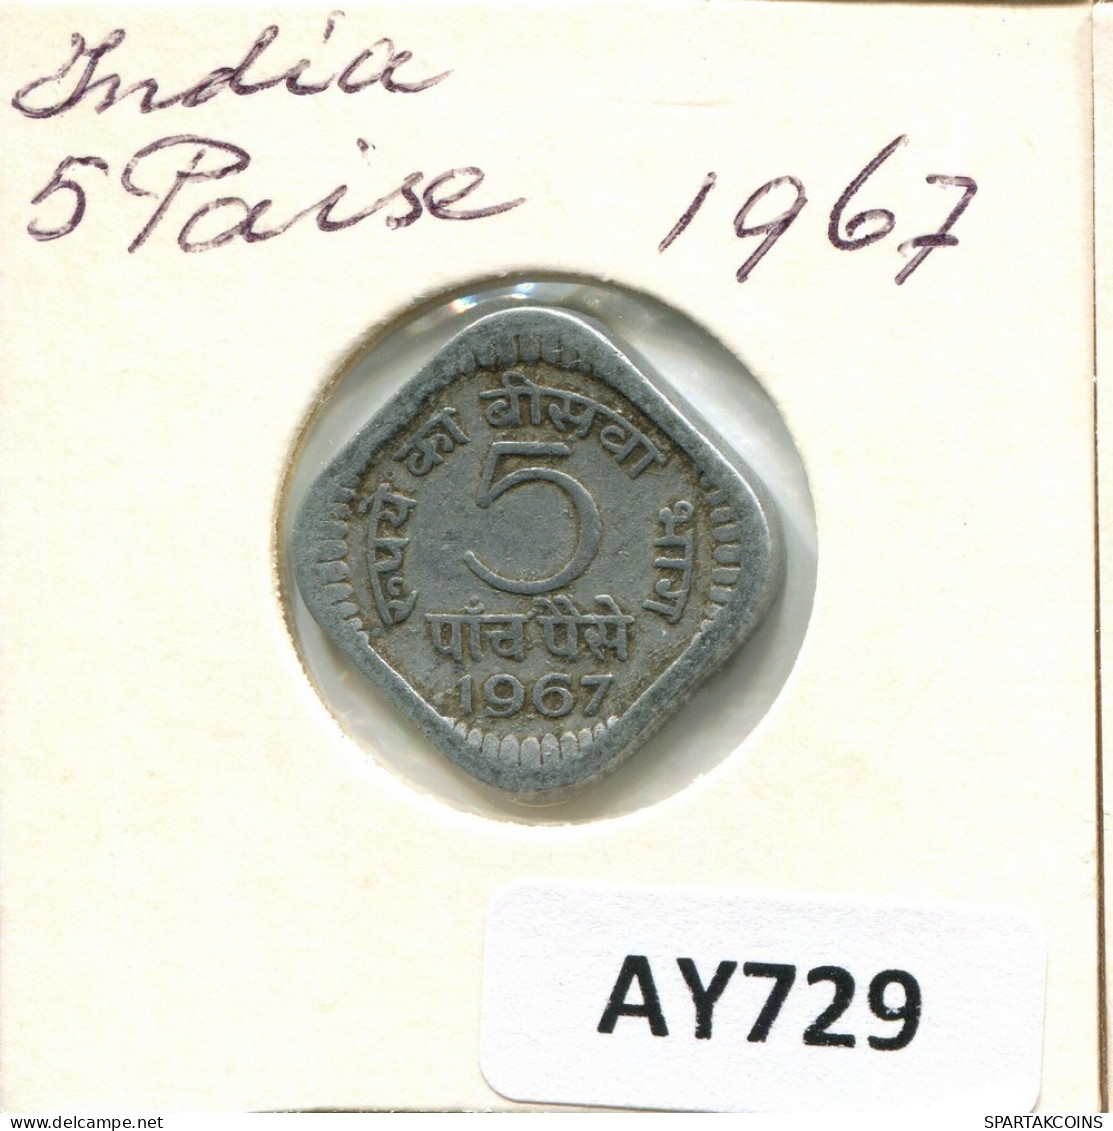 5 PAISE 1967 INDIEN INDIA Münze #AY729.D.A - India